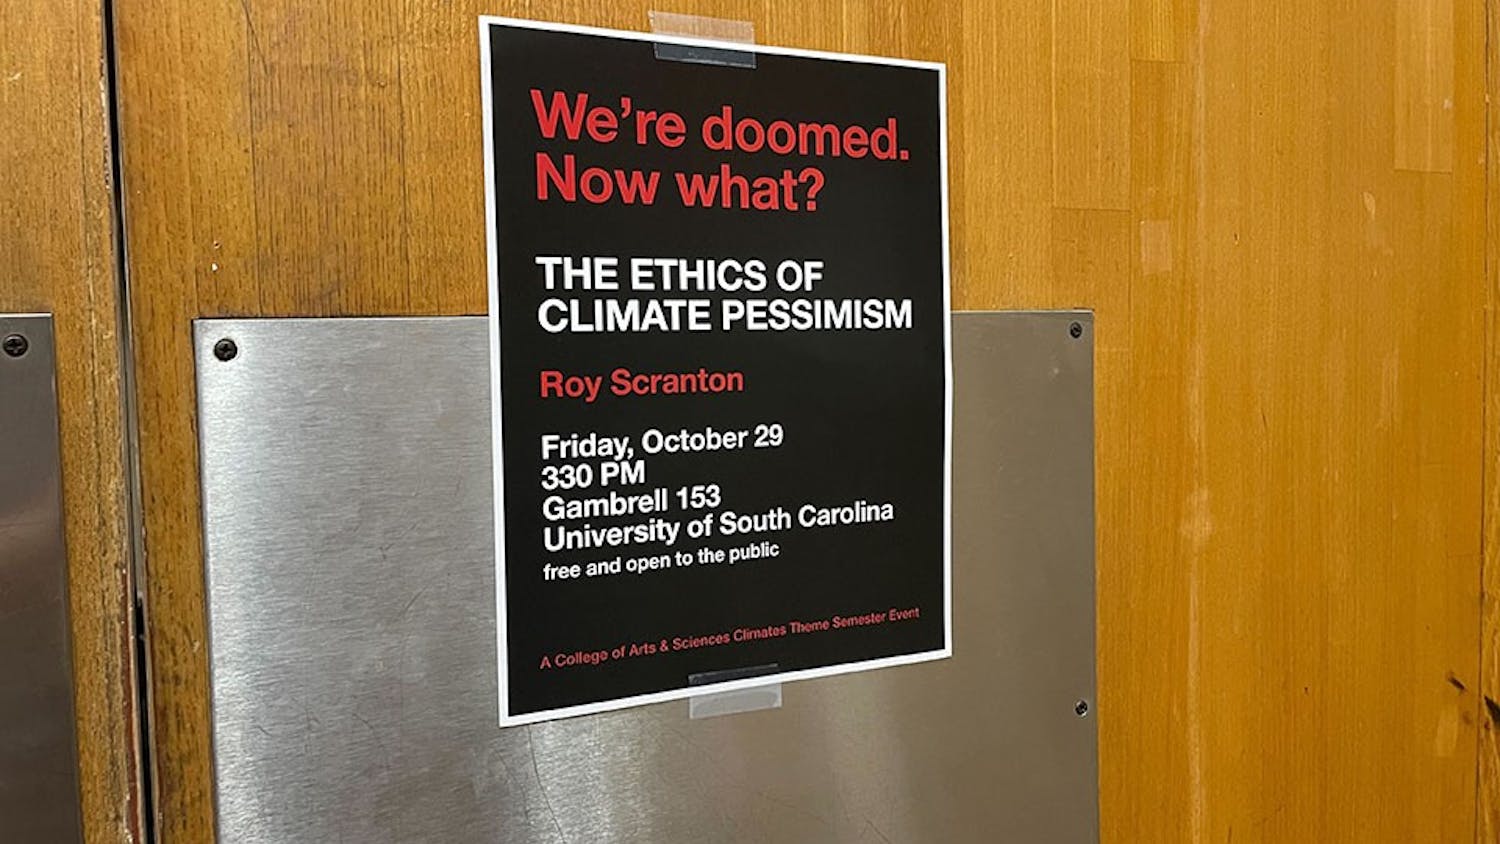 A flyer on the door of Notre Dame professor Roy Scranton's "The Ethics of Climate Pessimism" event. Scranton said using fear in communicating about climate change promotes the most action, but that it should not be overly nihilistic or instill hopelessness.